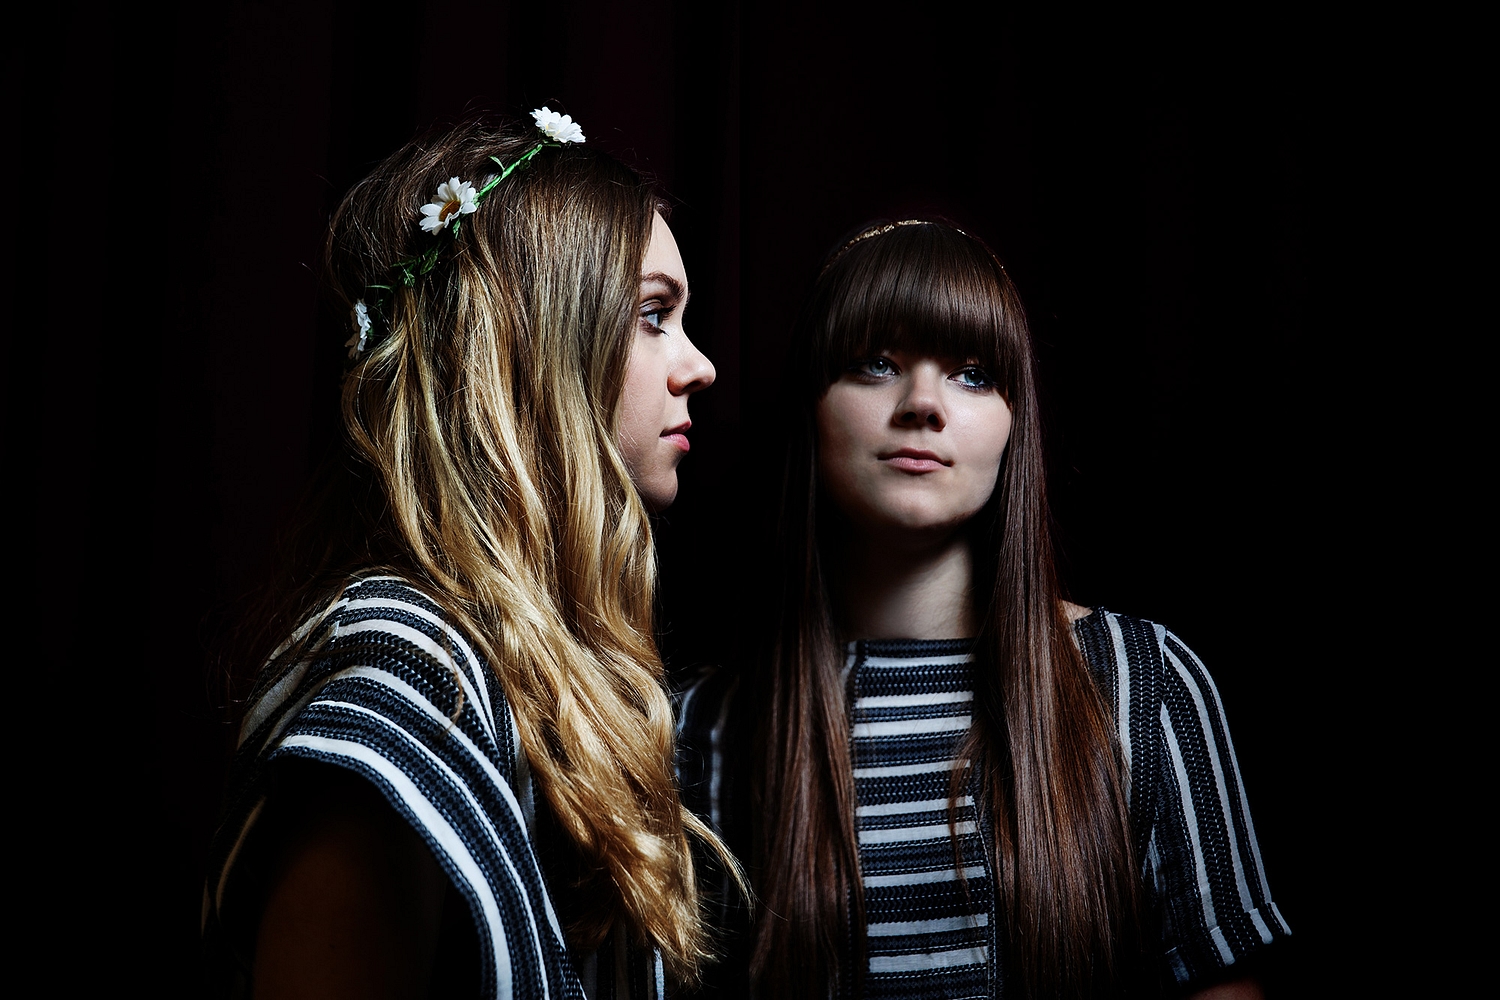 First Aid Kit: "It doesn't have to last forever"